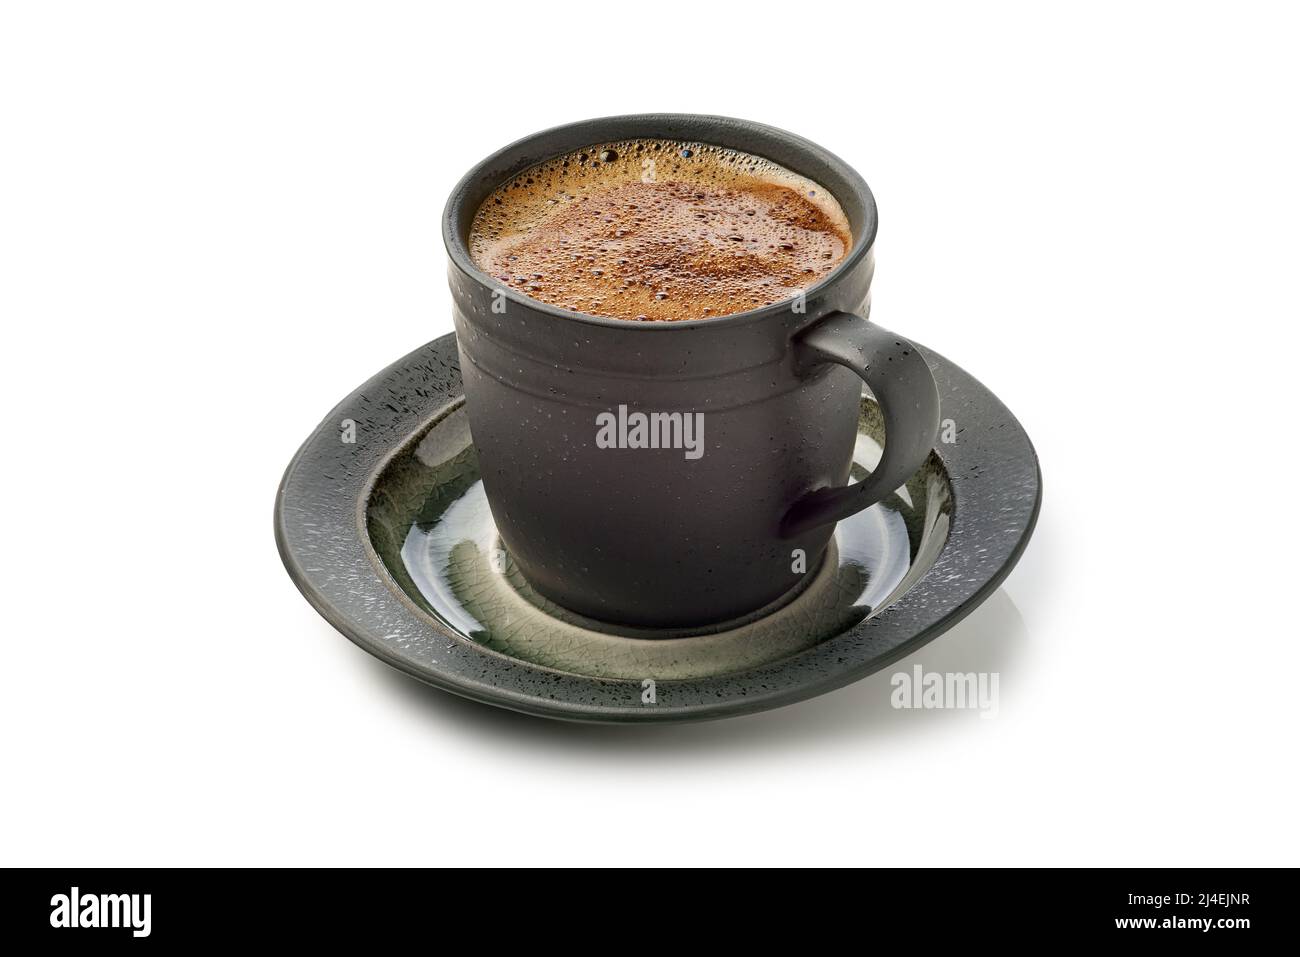 Cup of espresso coffee on white background Stock Photo